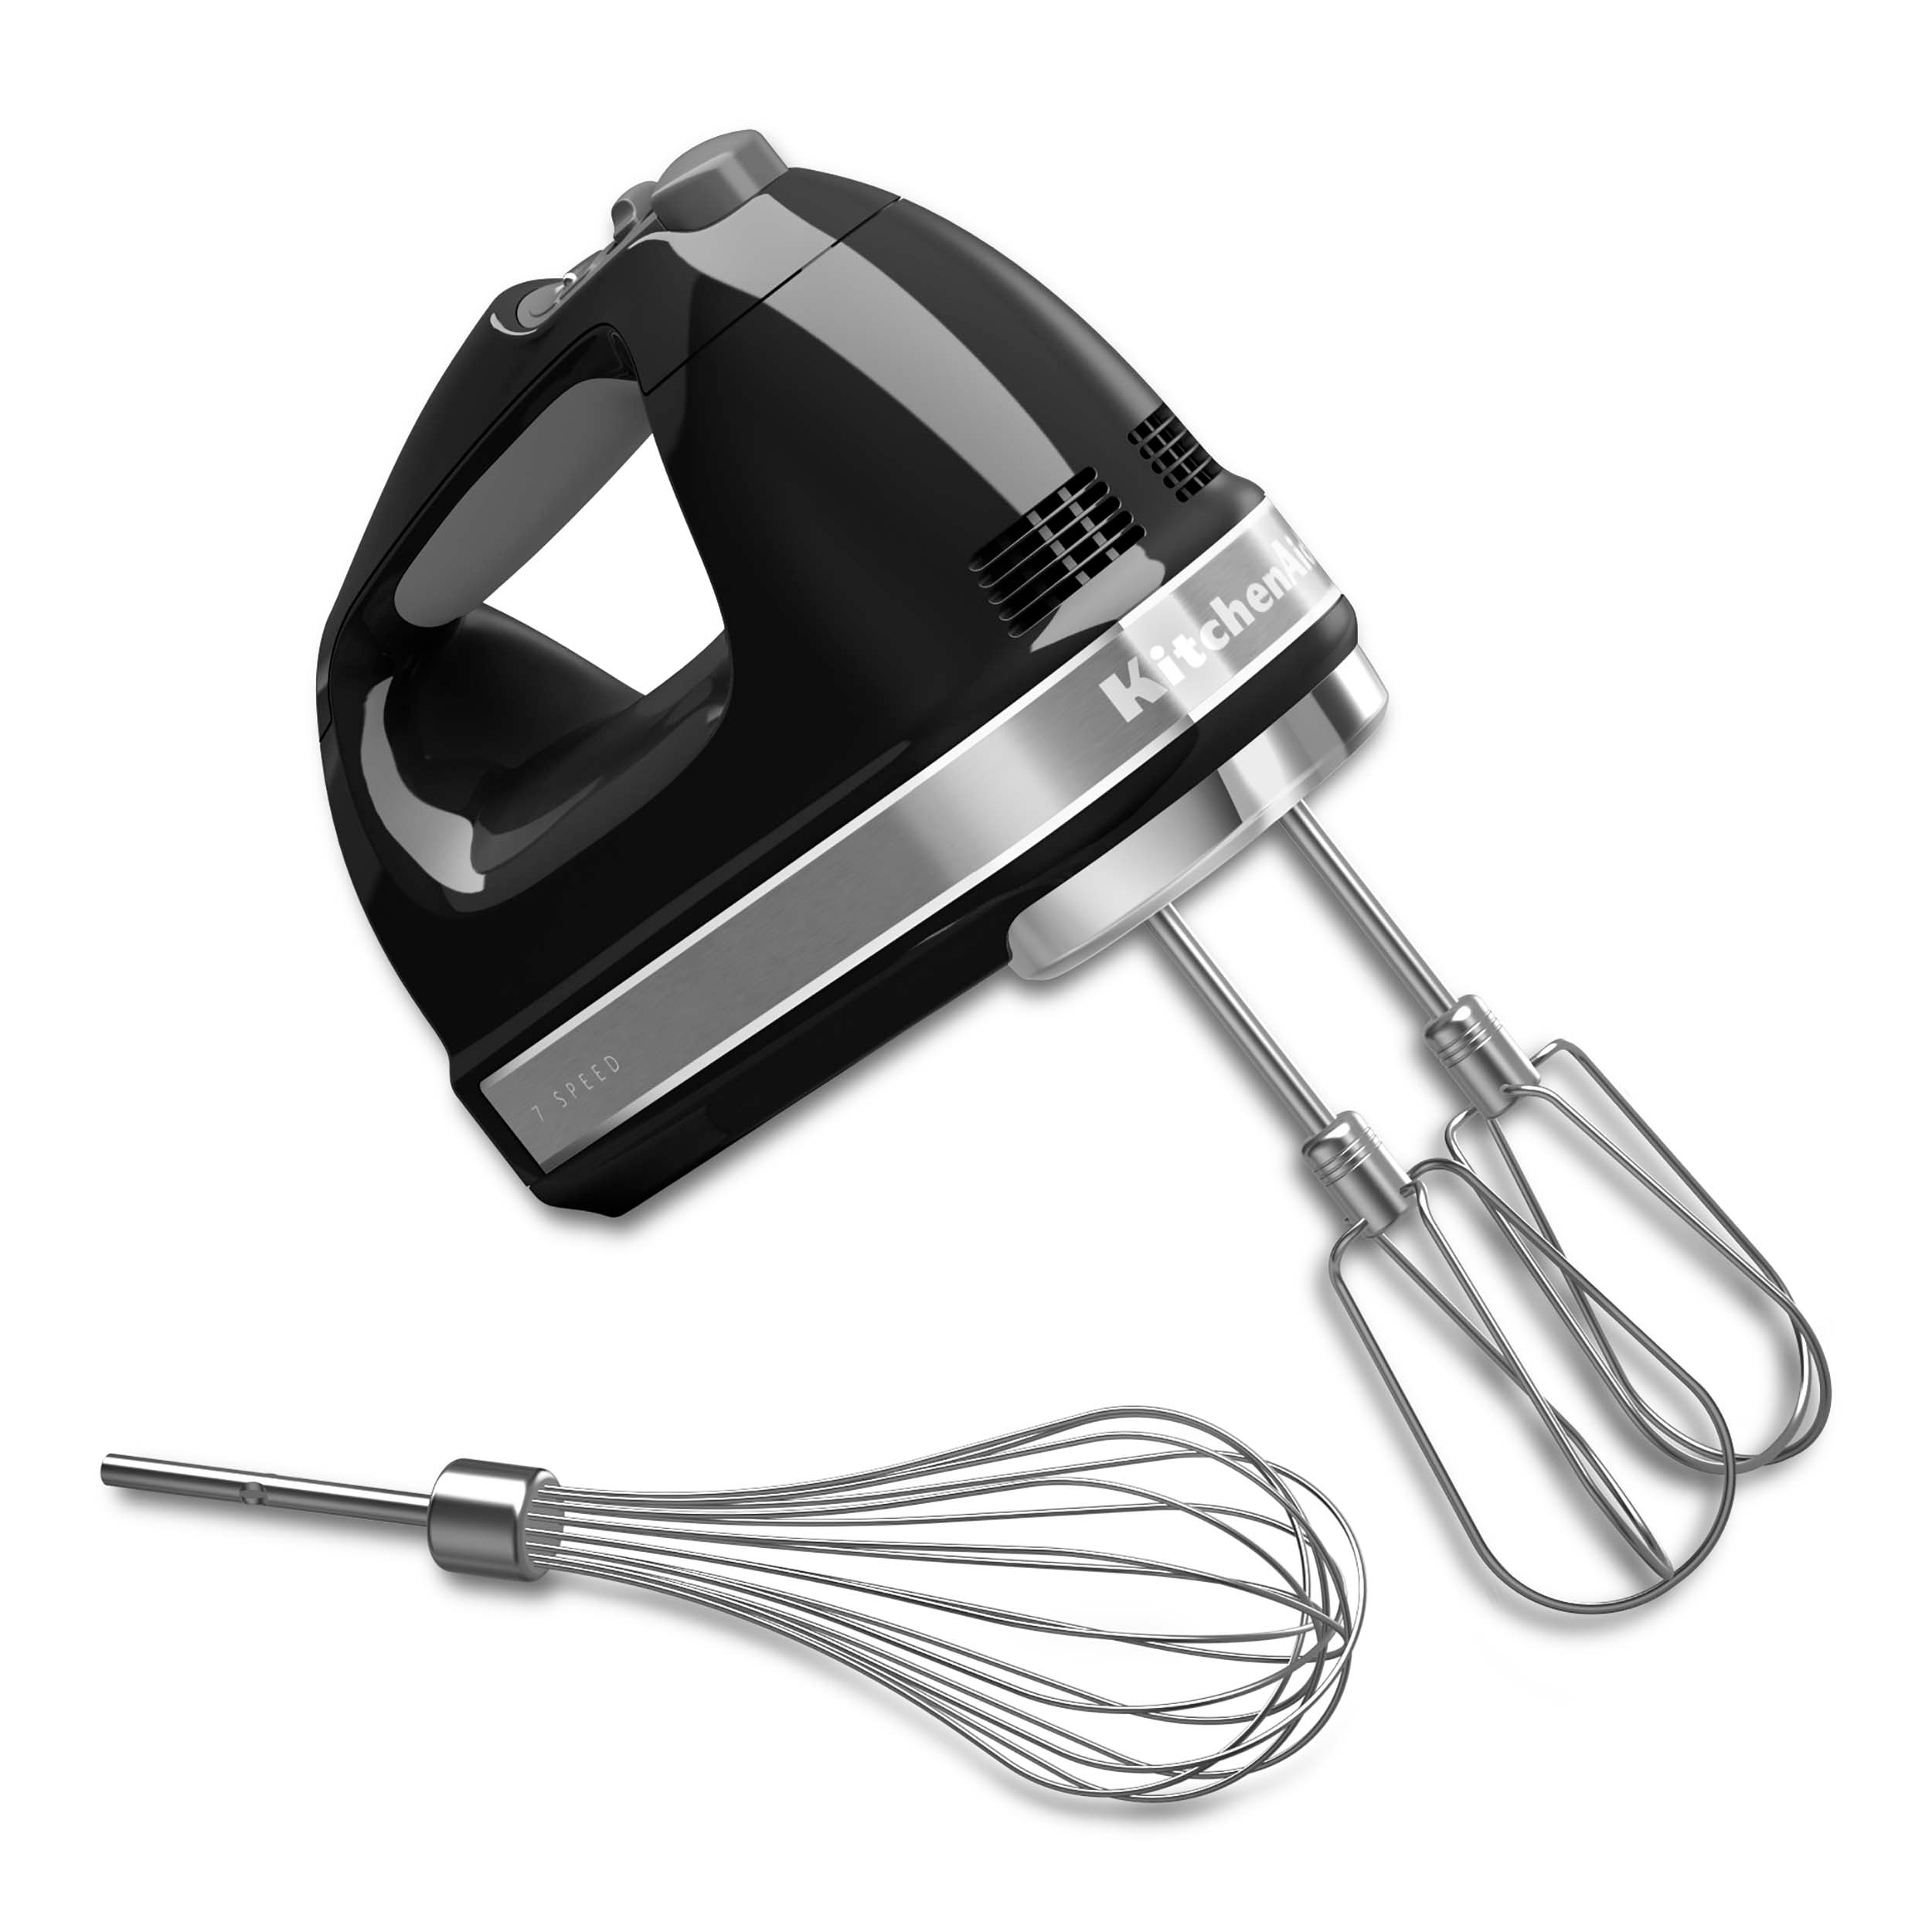 Brentwood HM-48R Lightweight 5-Speed Electric Hand Mixer, Red